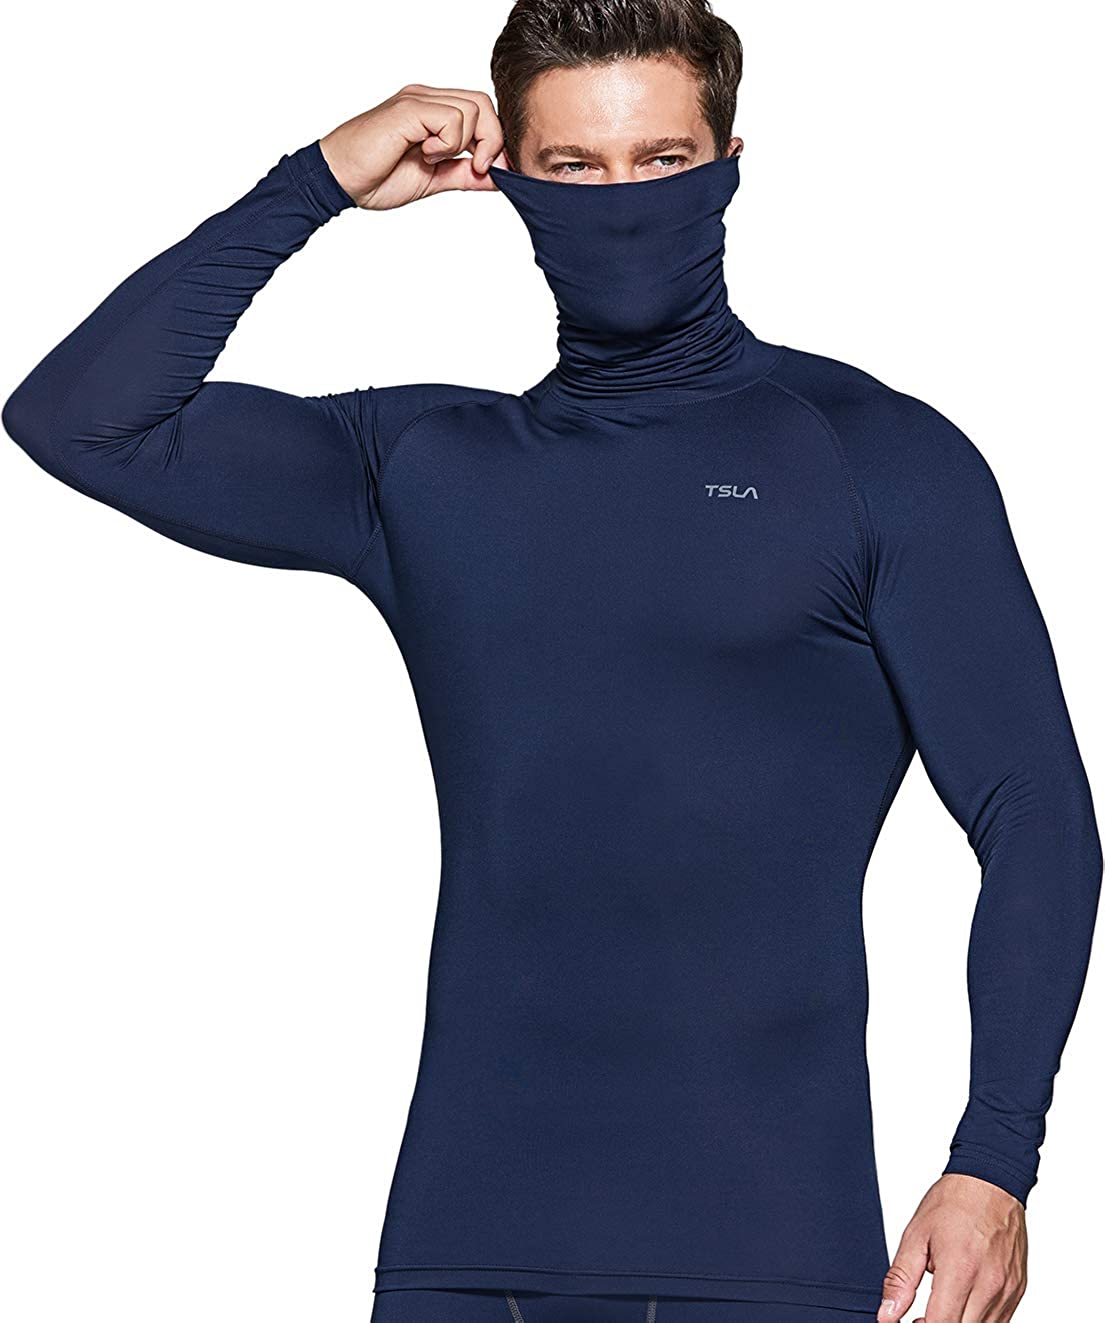 Cool Dry Fit Sports Compression Shirts UPF 50 TSLA Men's Long Sleeve Workout Shirts Hoodie with Mask 